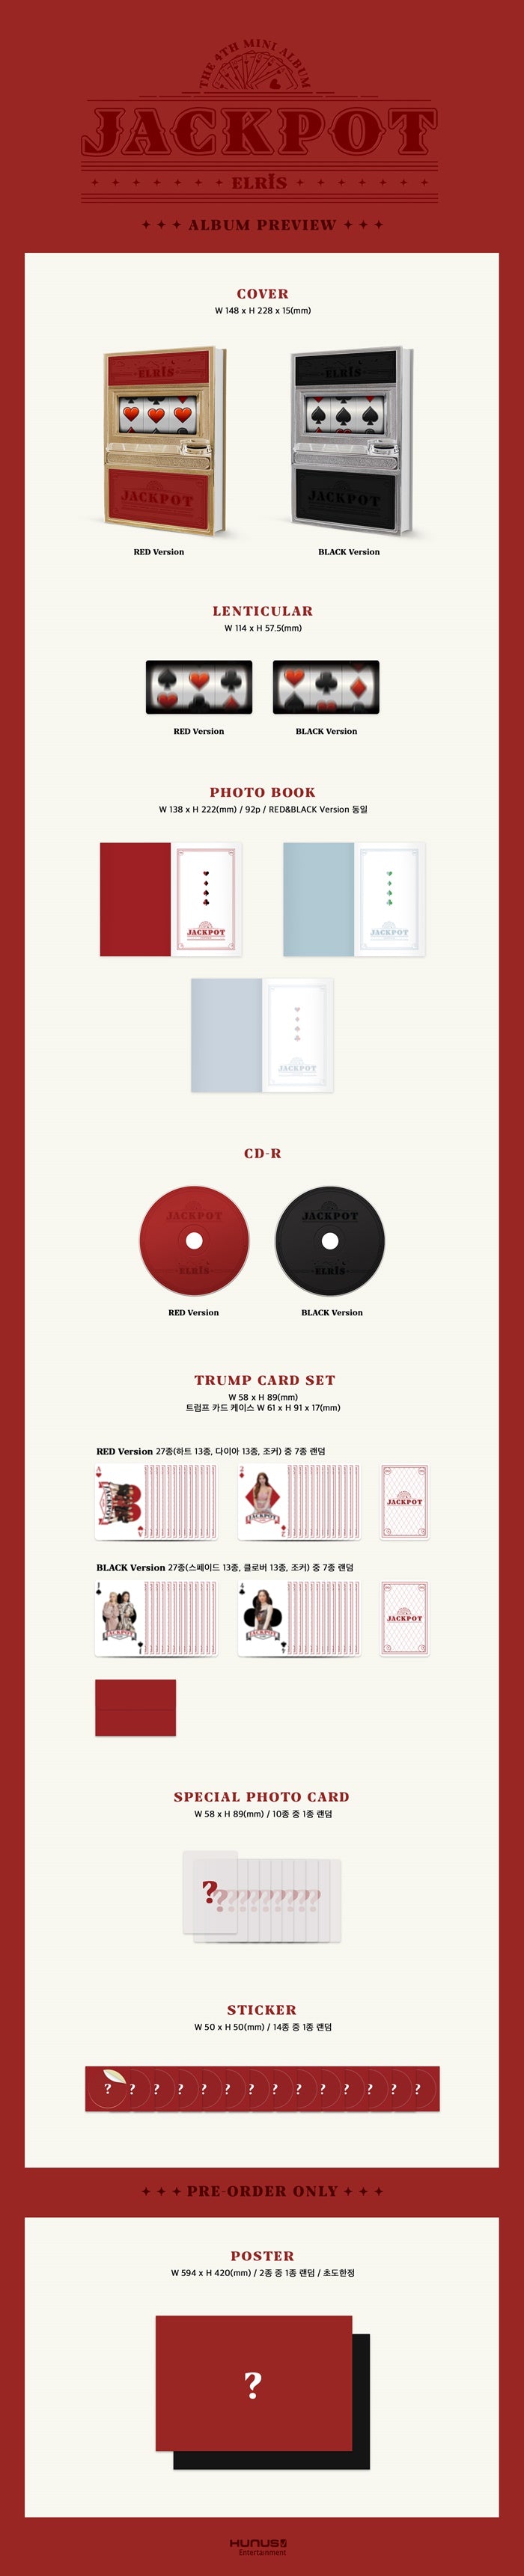 1 CD
1 Photo Book (92 pages)
1 Special Photo Card
1 Sticker
1 Lenticular Card
7 Trump Cards